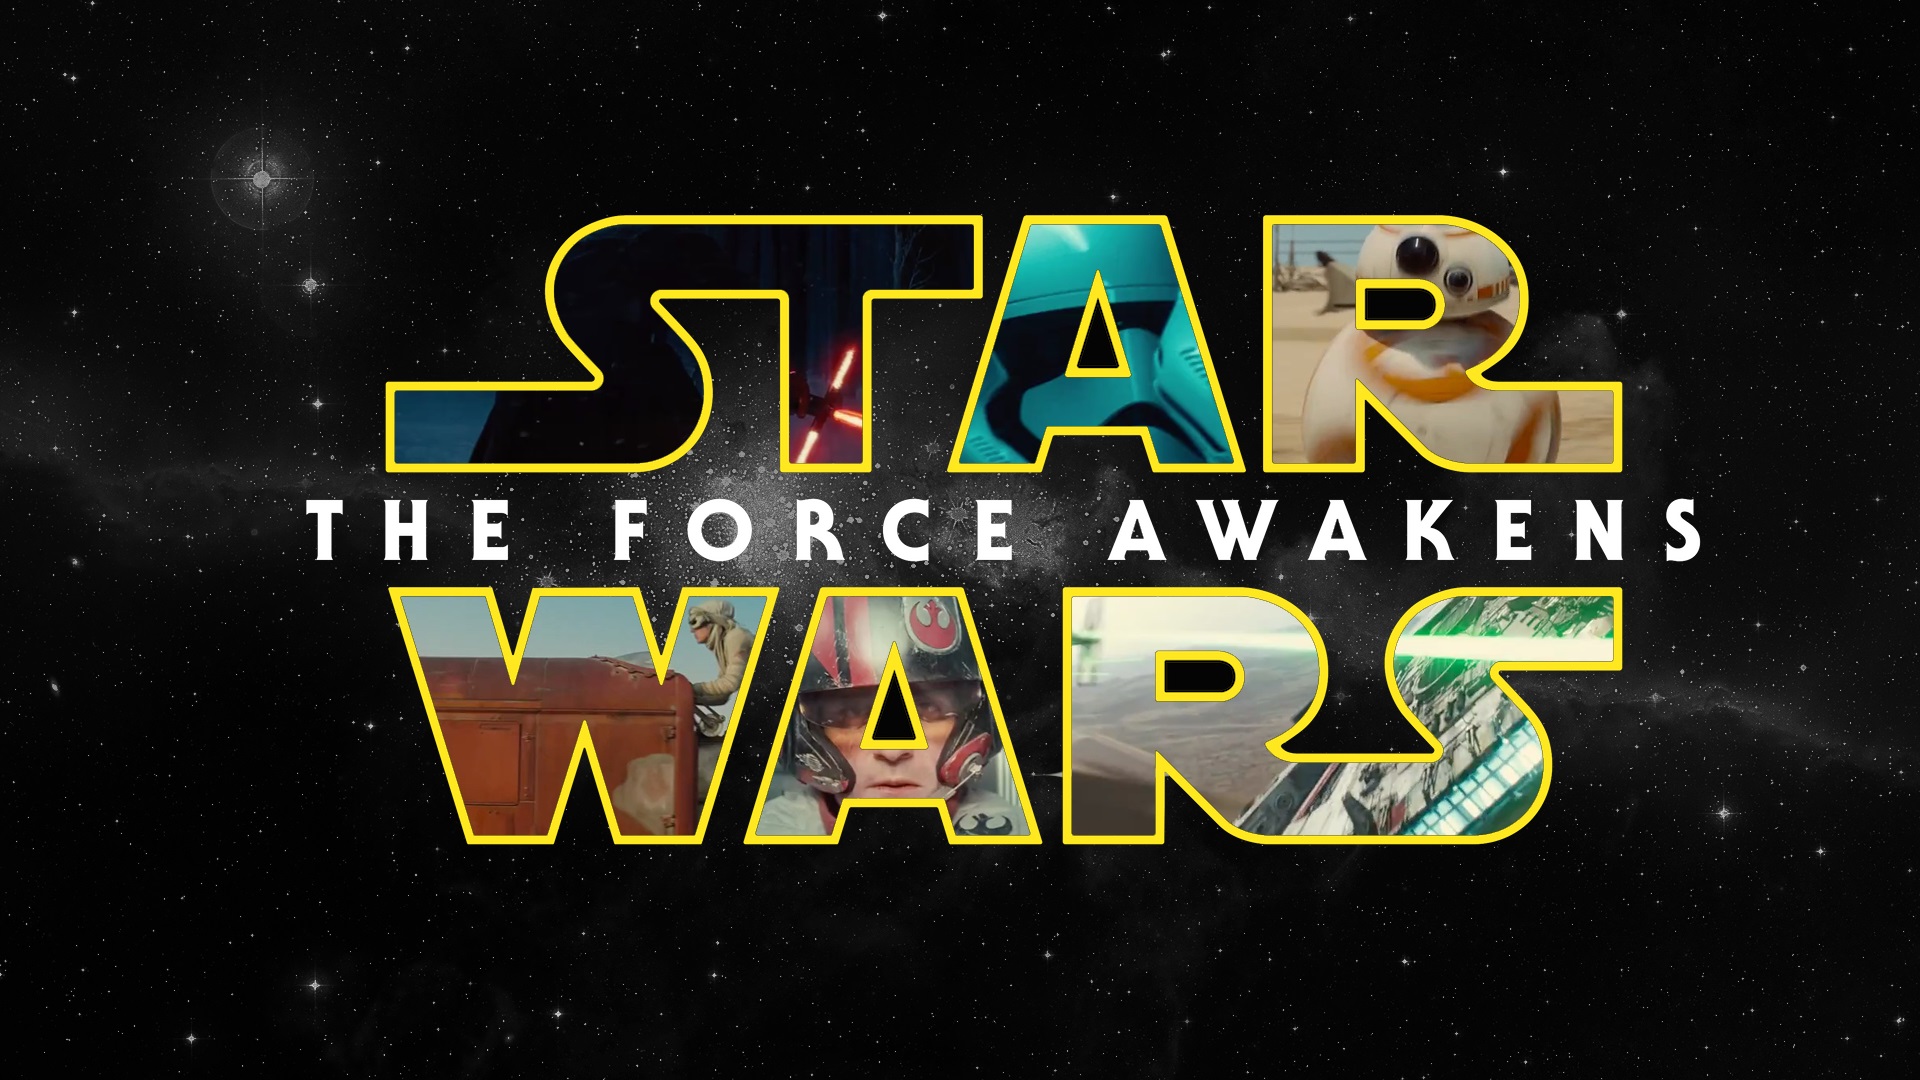 the saga of star wars back again with star wars the awakening of force 1920x1080